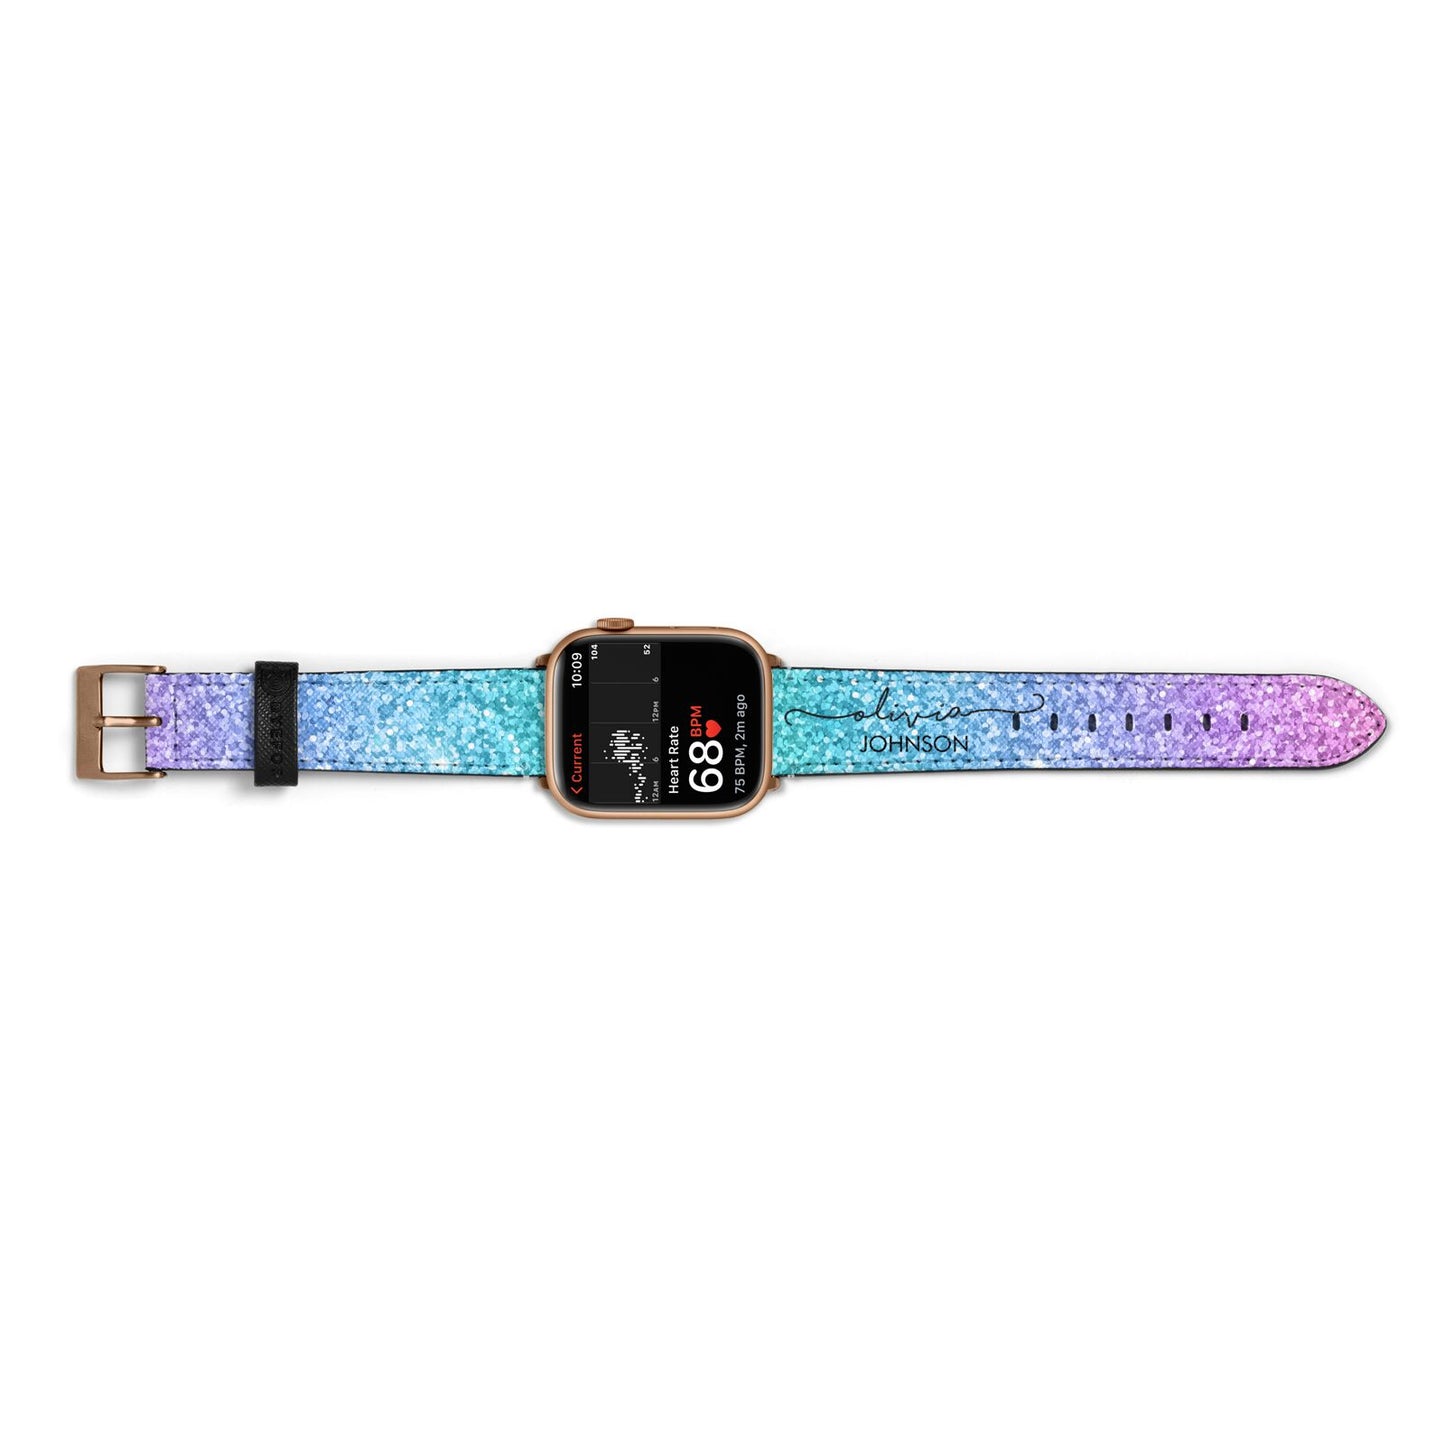 Personalised Ombre Glitter with Names Apple Watch Strap Size 38mm Landscape Image Gold Hardware